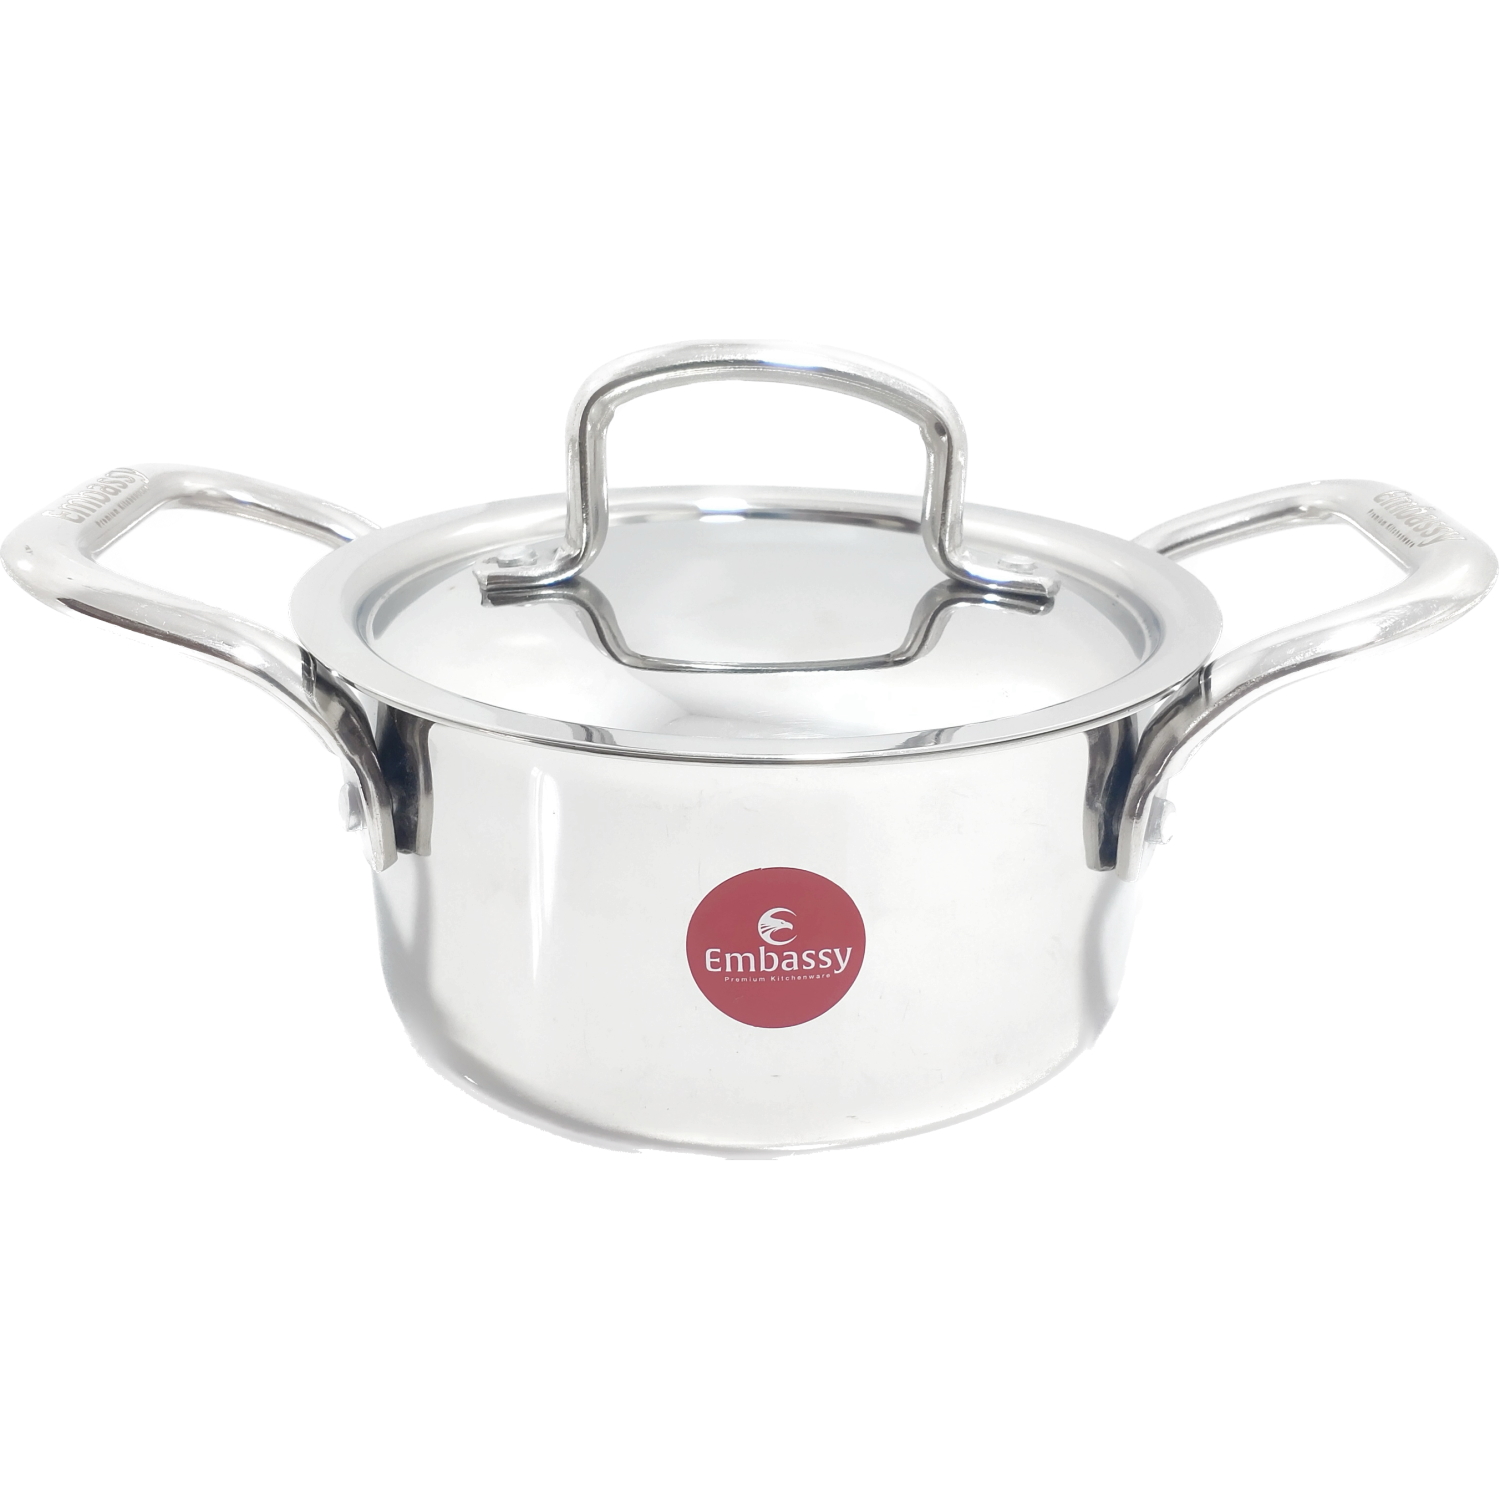 Embassy Stainless Steel Thickply Casserole with Lid Size 11 - 15cm